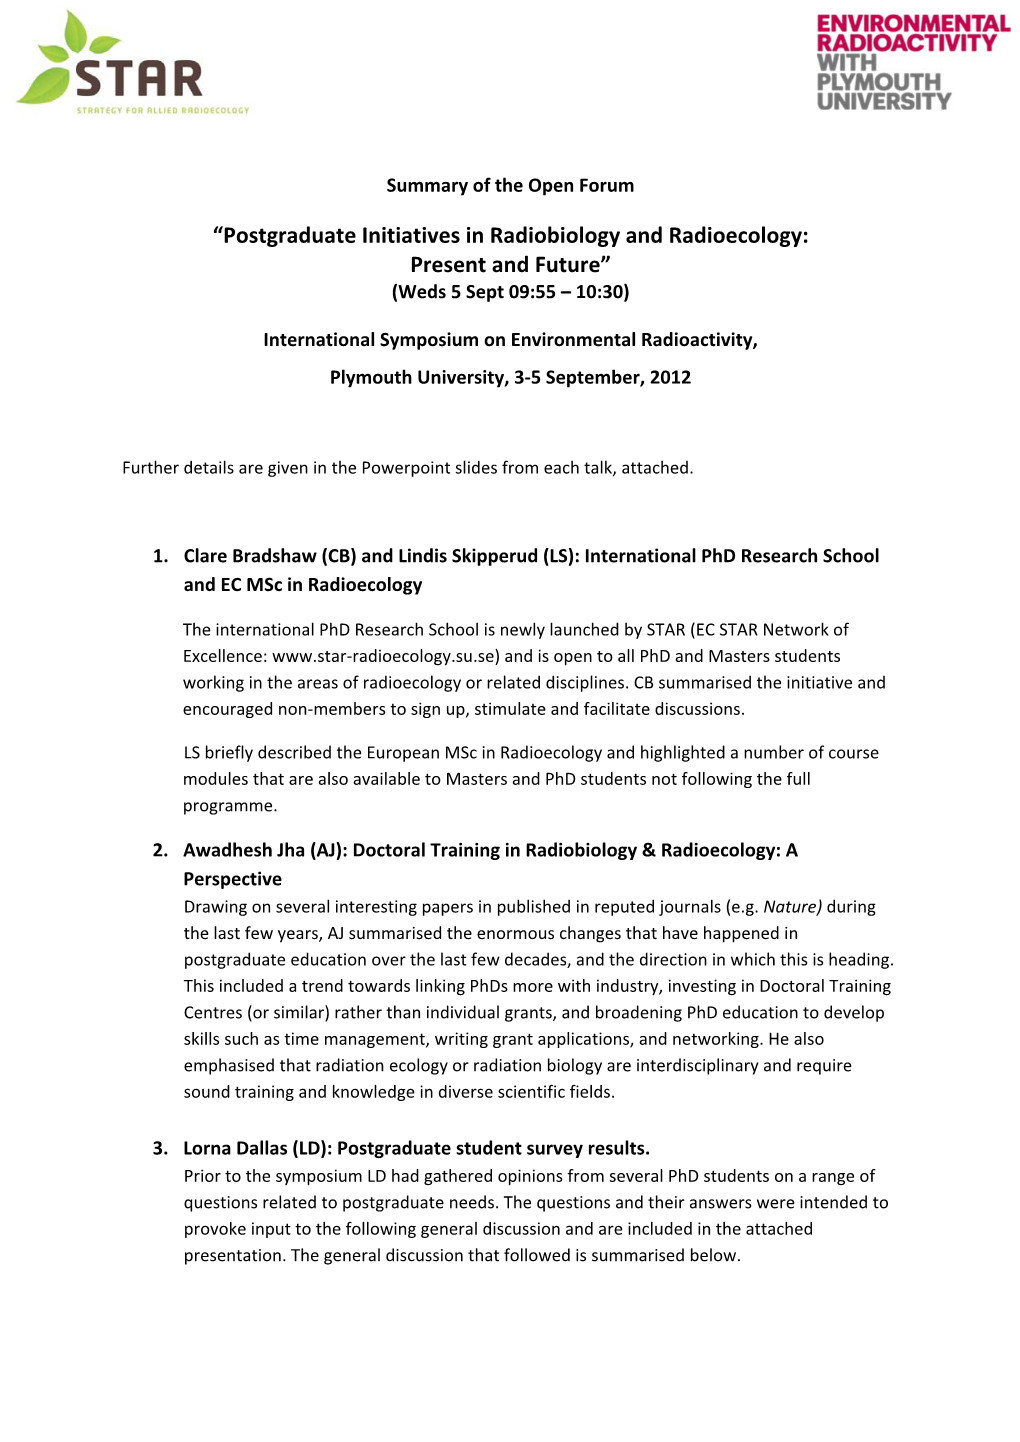 “Postgraduate Initiatives in Radiobiology and Radioecology: Present and Future” (Weds 5 Sept 09:55 – 10:30)